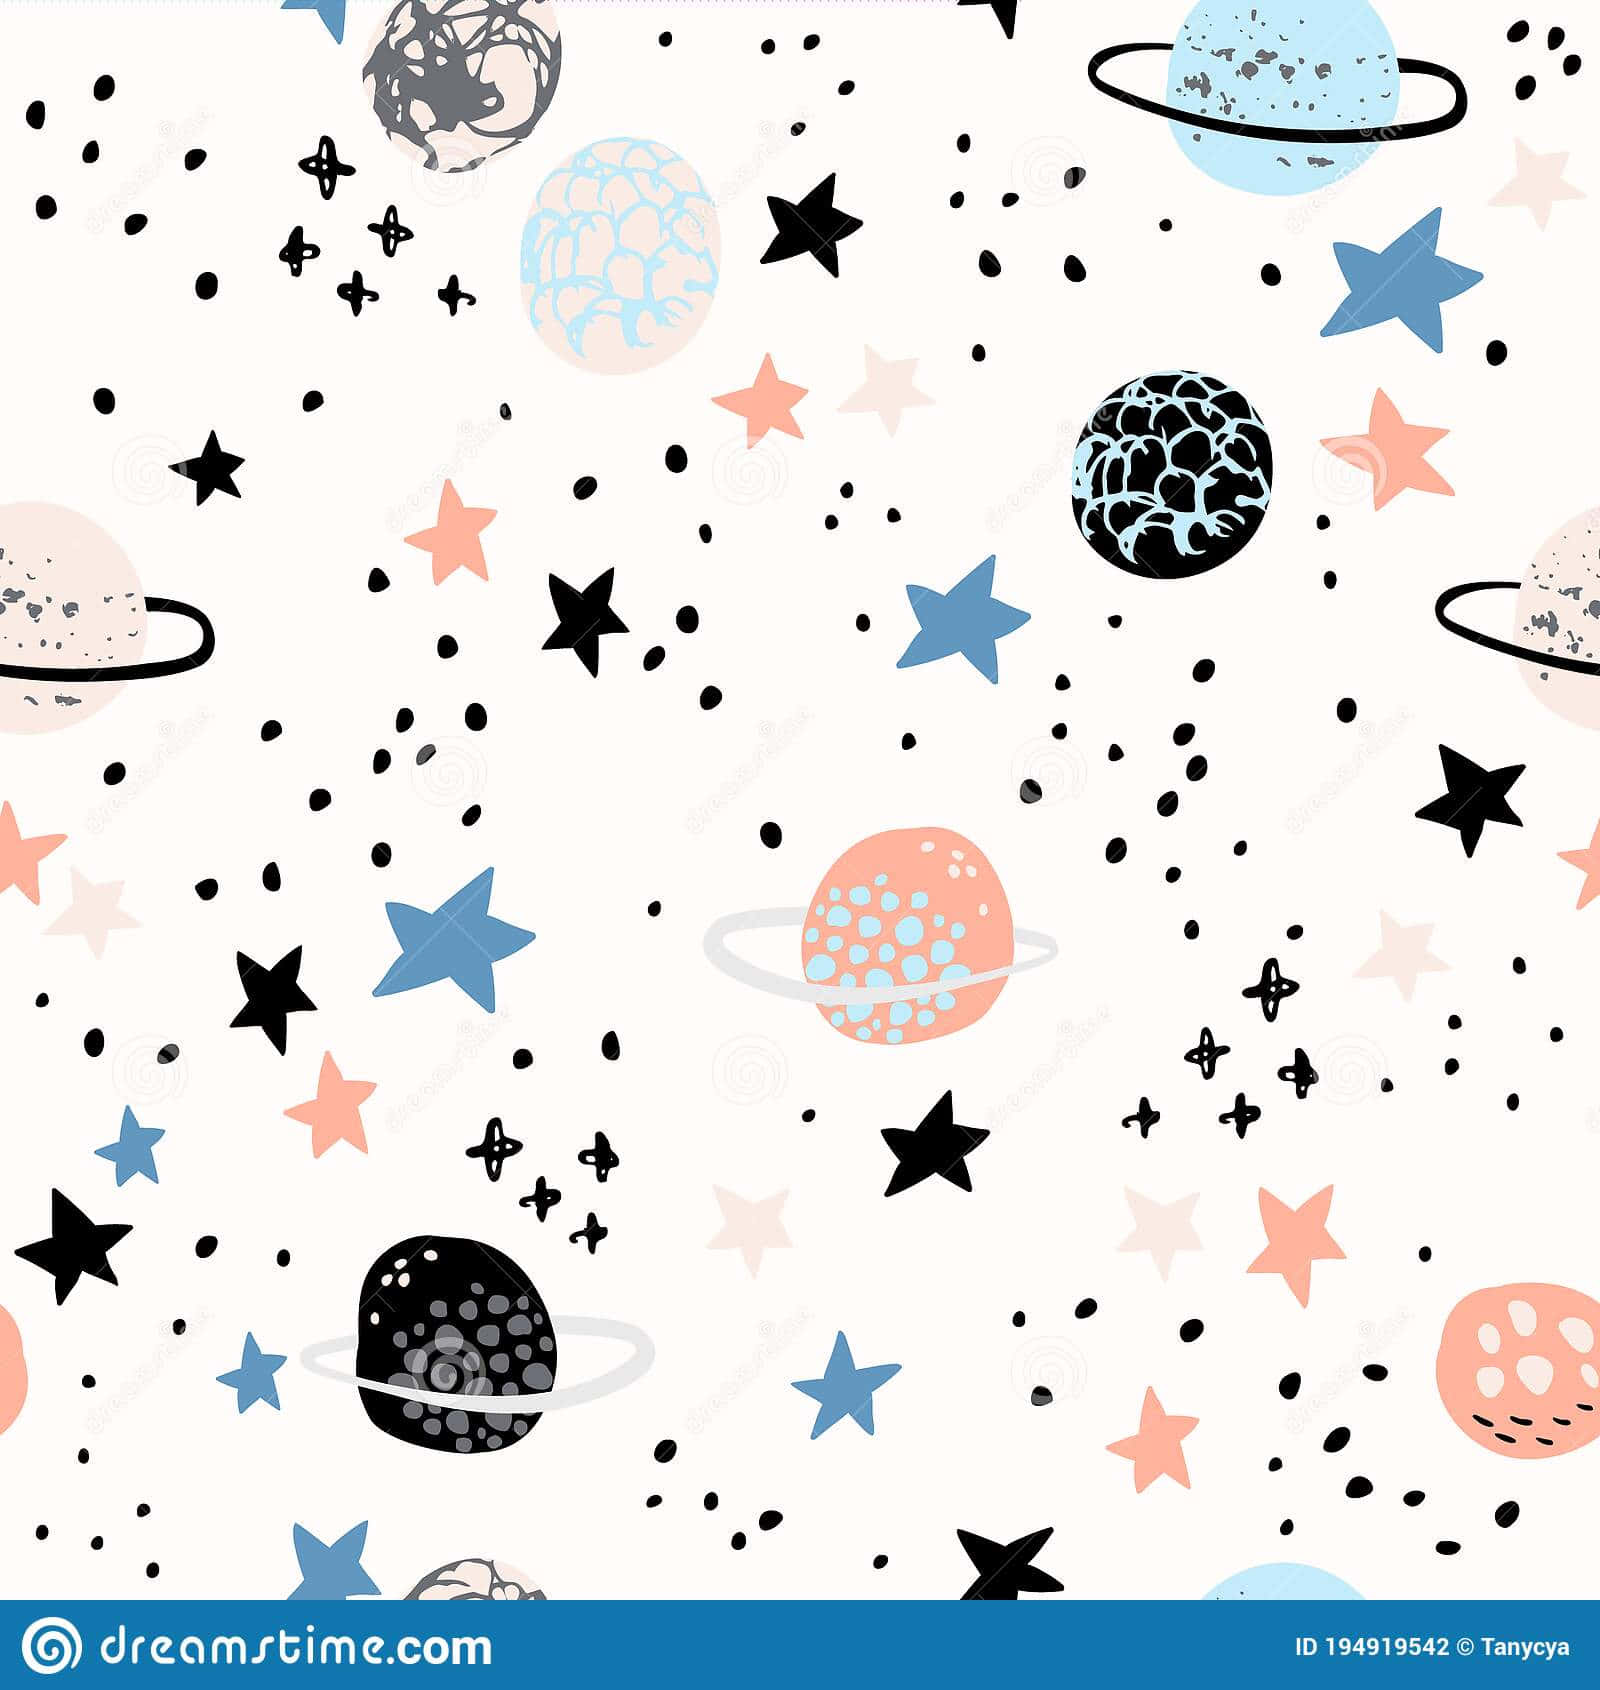 Take a look at this out of this world animated space scene Wallpaper